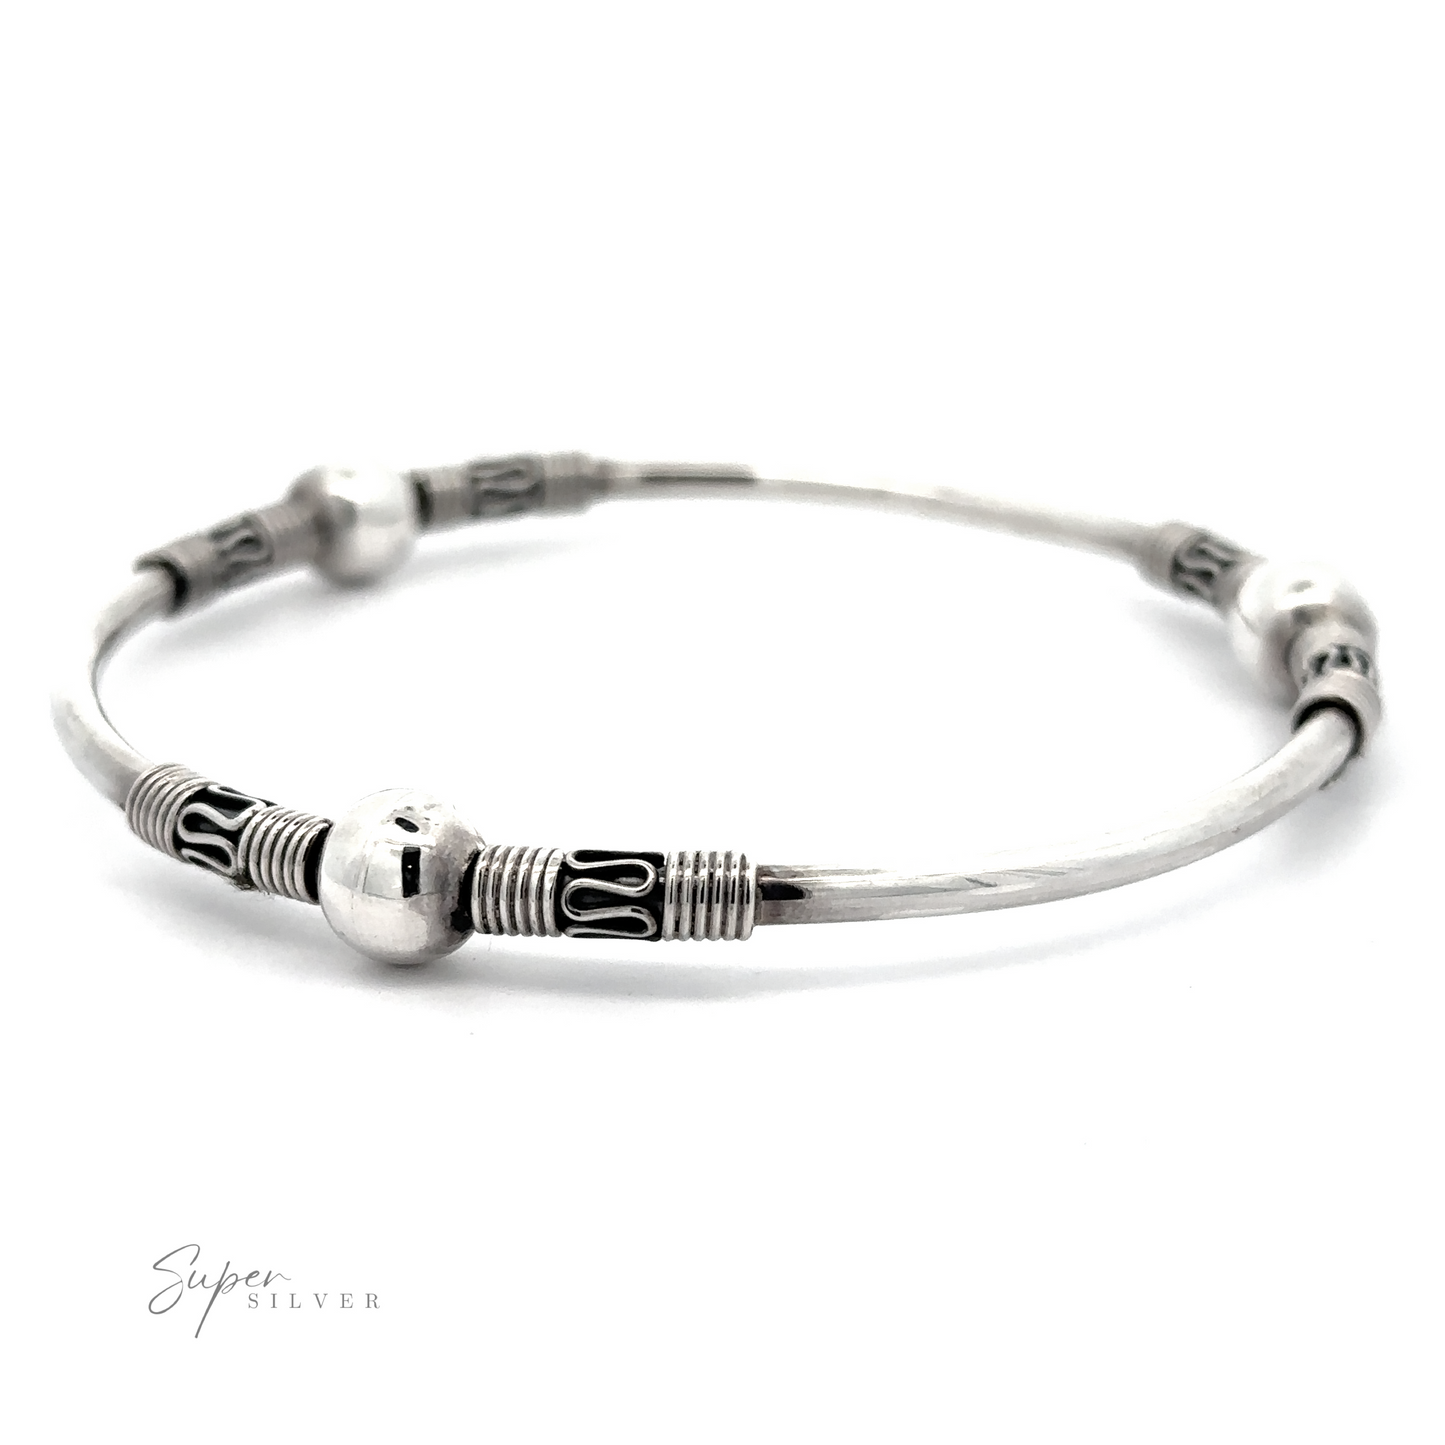 
                  
                    This Silver Bali Style Bangle Bracelet features decorative spherical beads and intricate etched designs, reminiscent of a Balinese style bangle.
                  
                